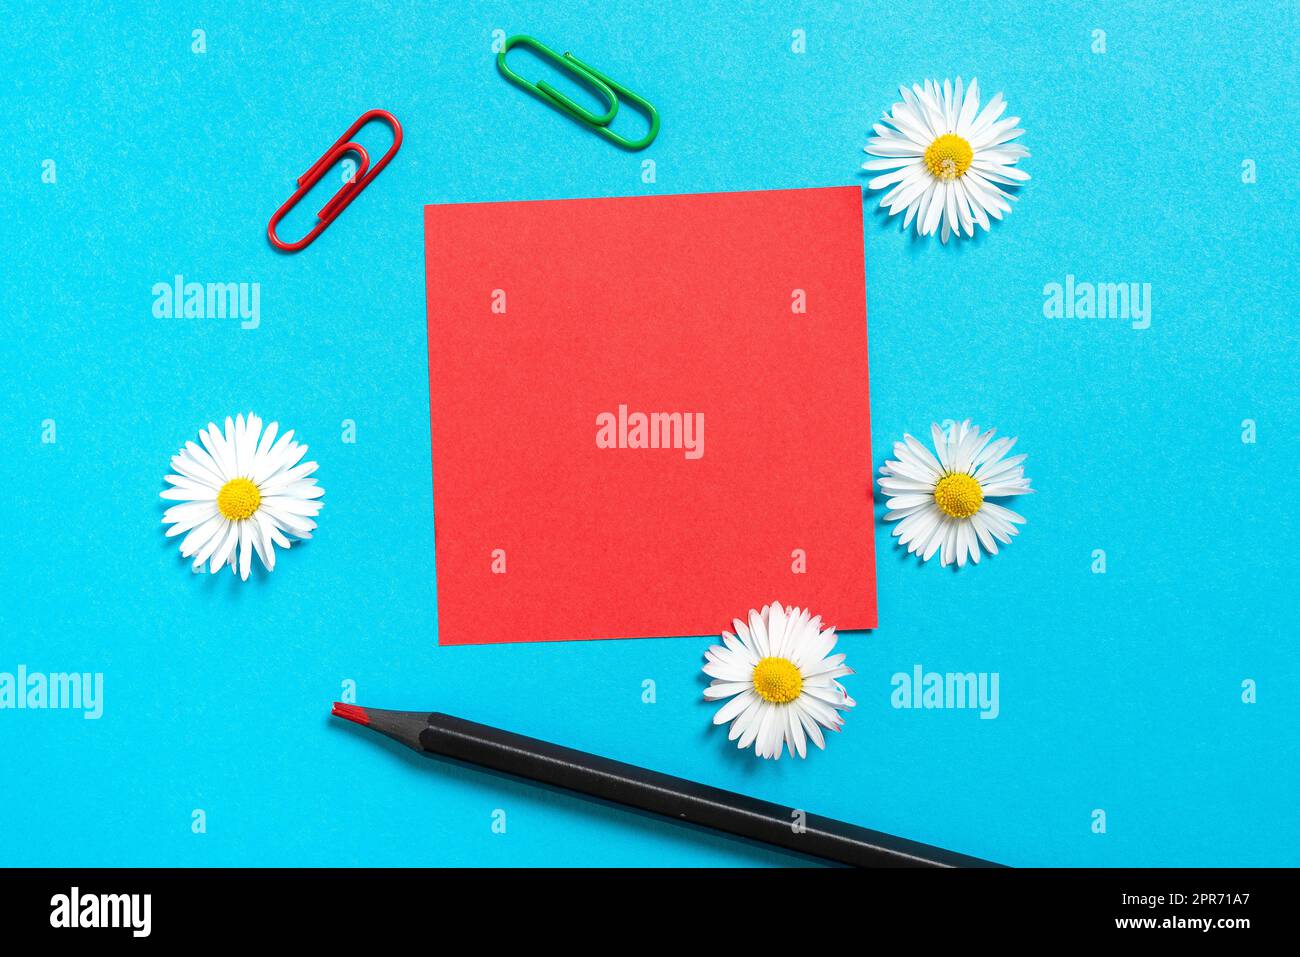 Sticky Note With Important Messages With Paperclips, Pencil And Flowers Around On Desk. Memo With Crutial Informations With Colored Clips Placed On Table. Stock Photo